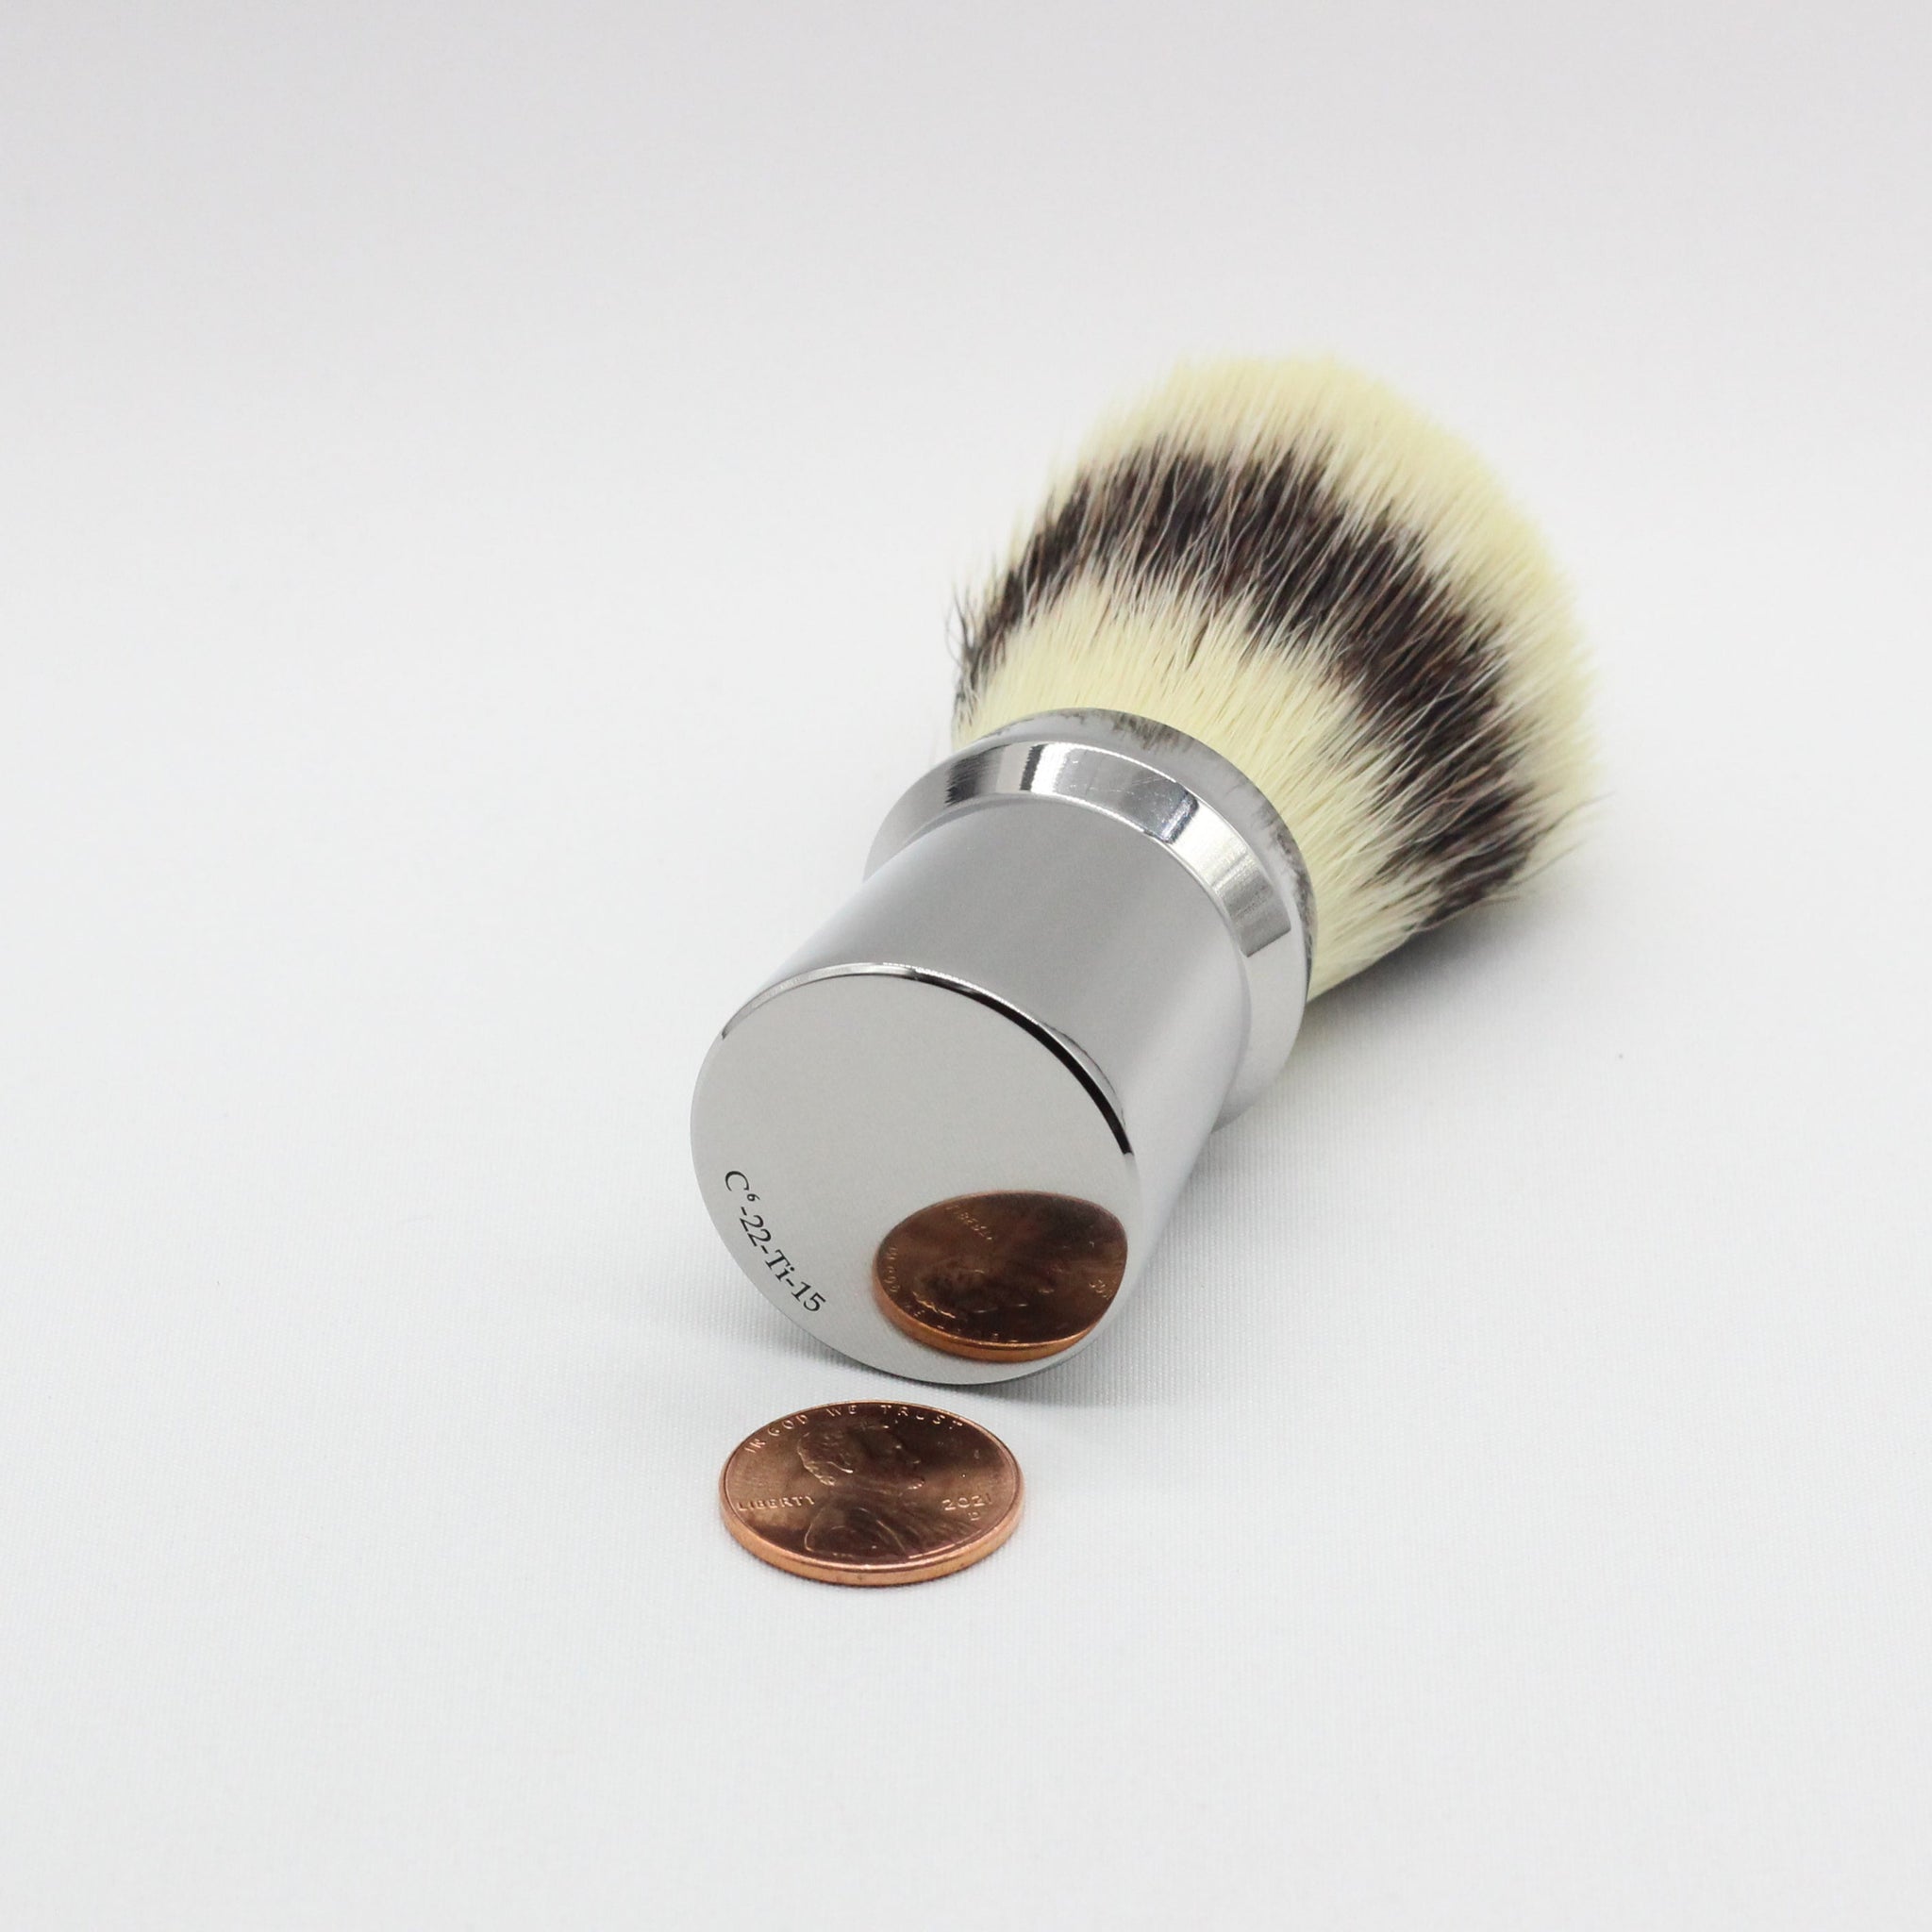 Coin reflection - Titanium Shaving brush - high polish finish to reduce places where dirt and bacteria can collect - Used to lift hairs and soften skin while shaving. Essential part of a grooming kit 